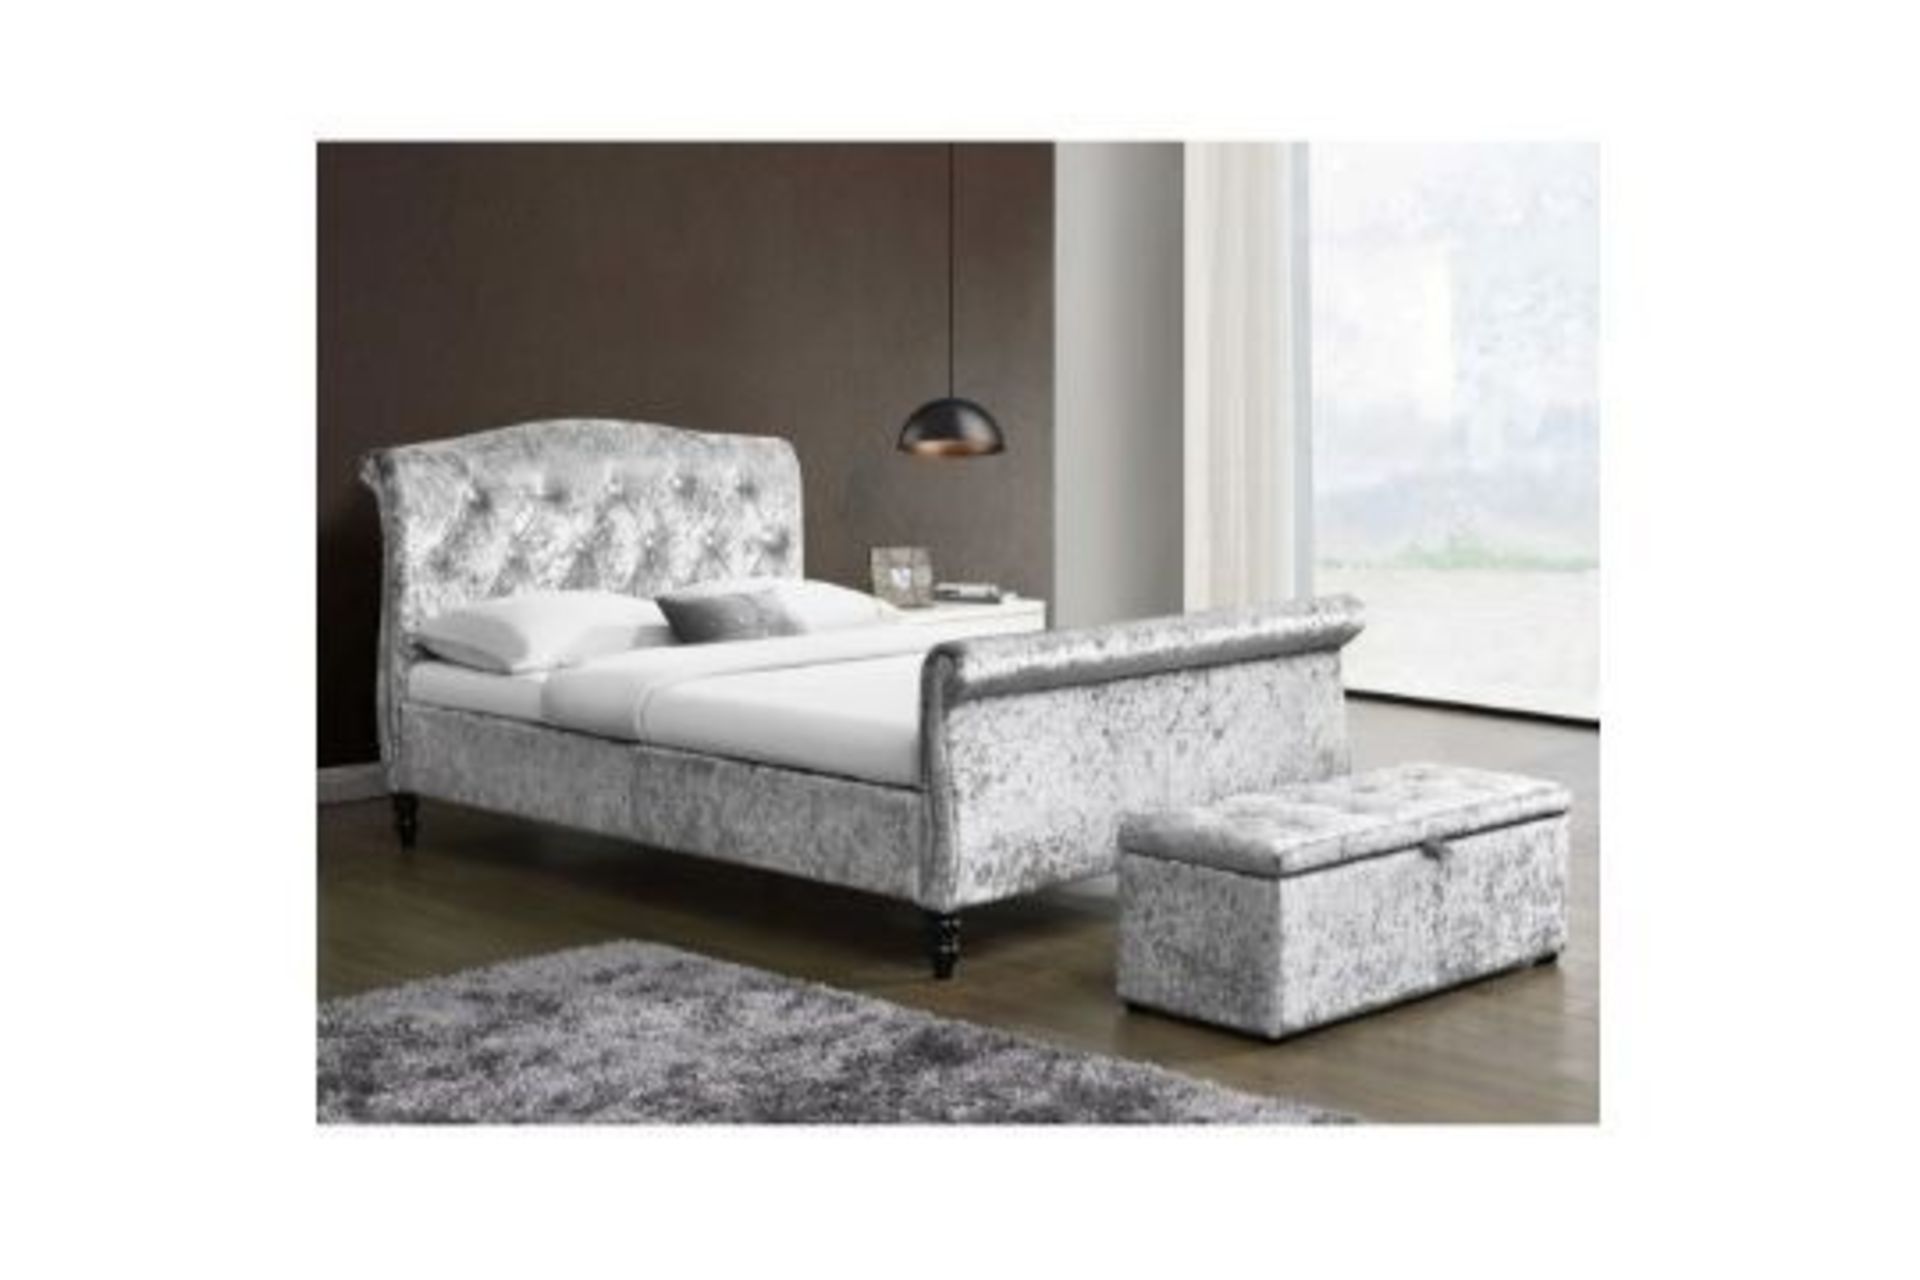 MEISSA Crushed Velvet Upholstered Double Bed with Diamante Headboard, Silver. - ER29